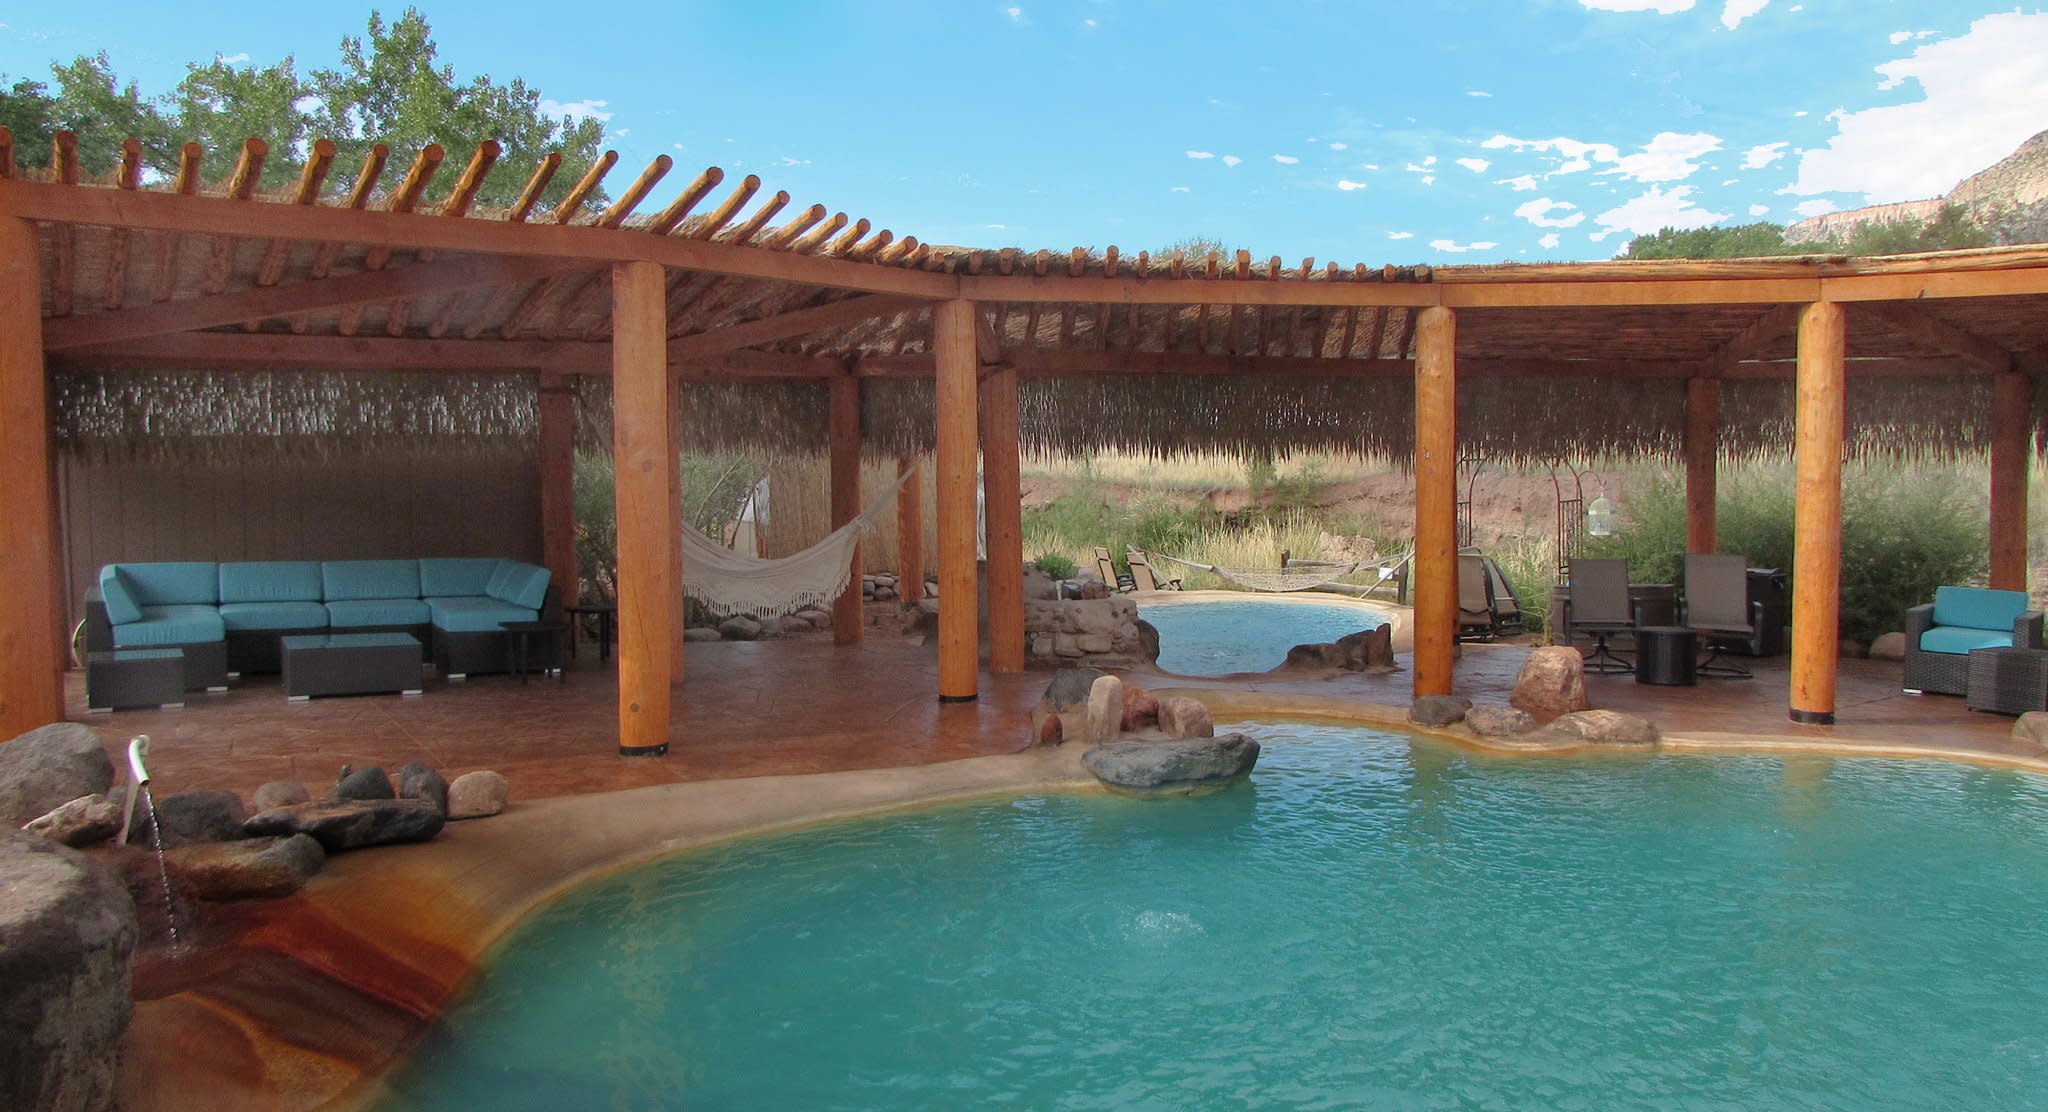 Soak at Jemez Hot Springs - Home of Giggling Springs, a day trip from Albuquerque